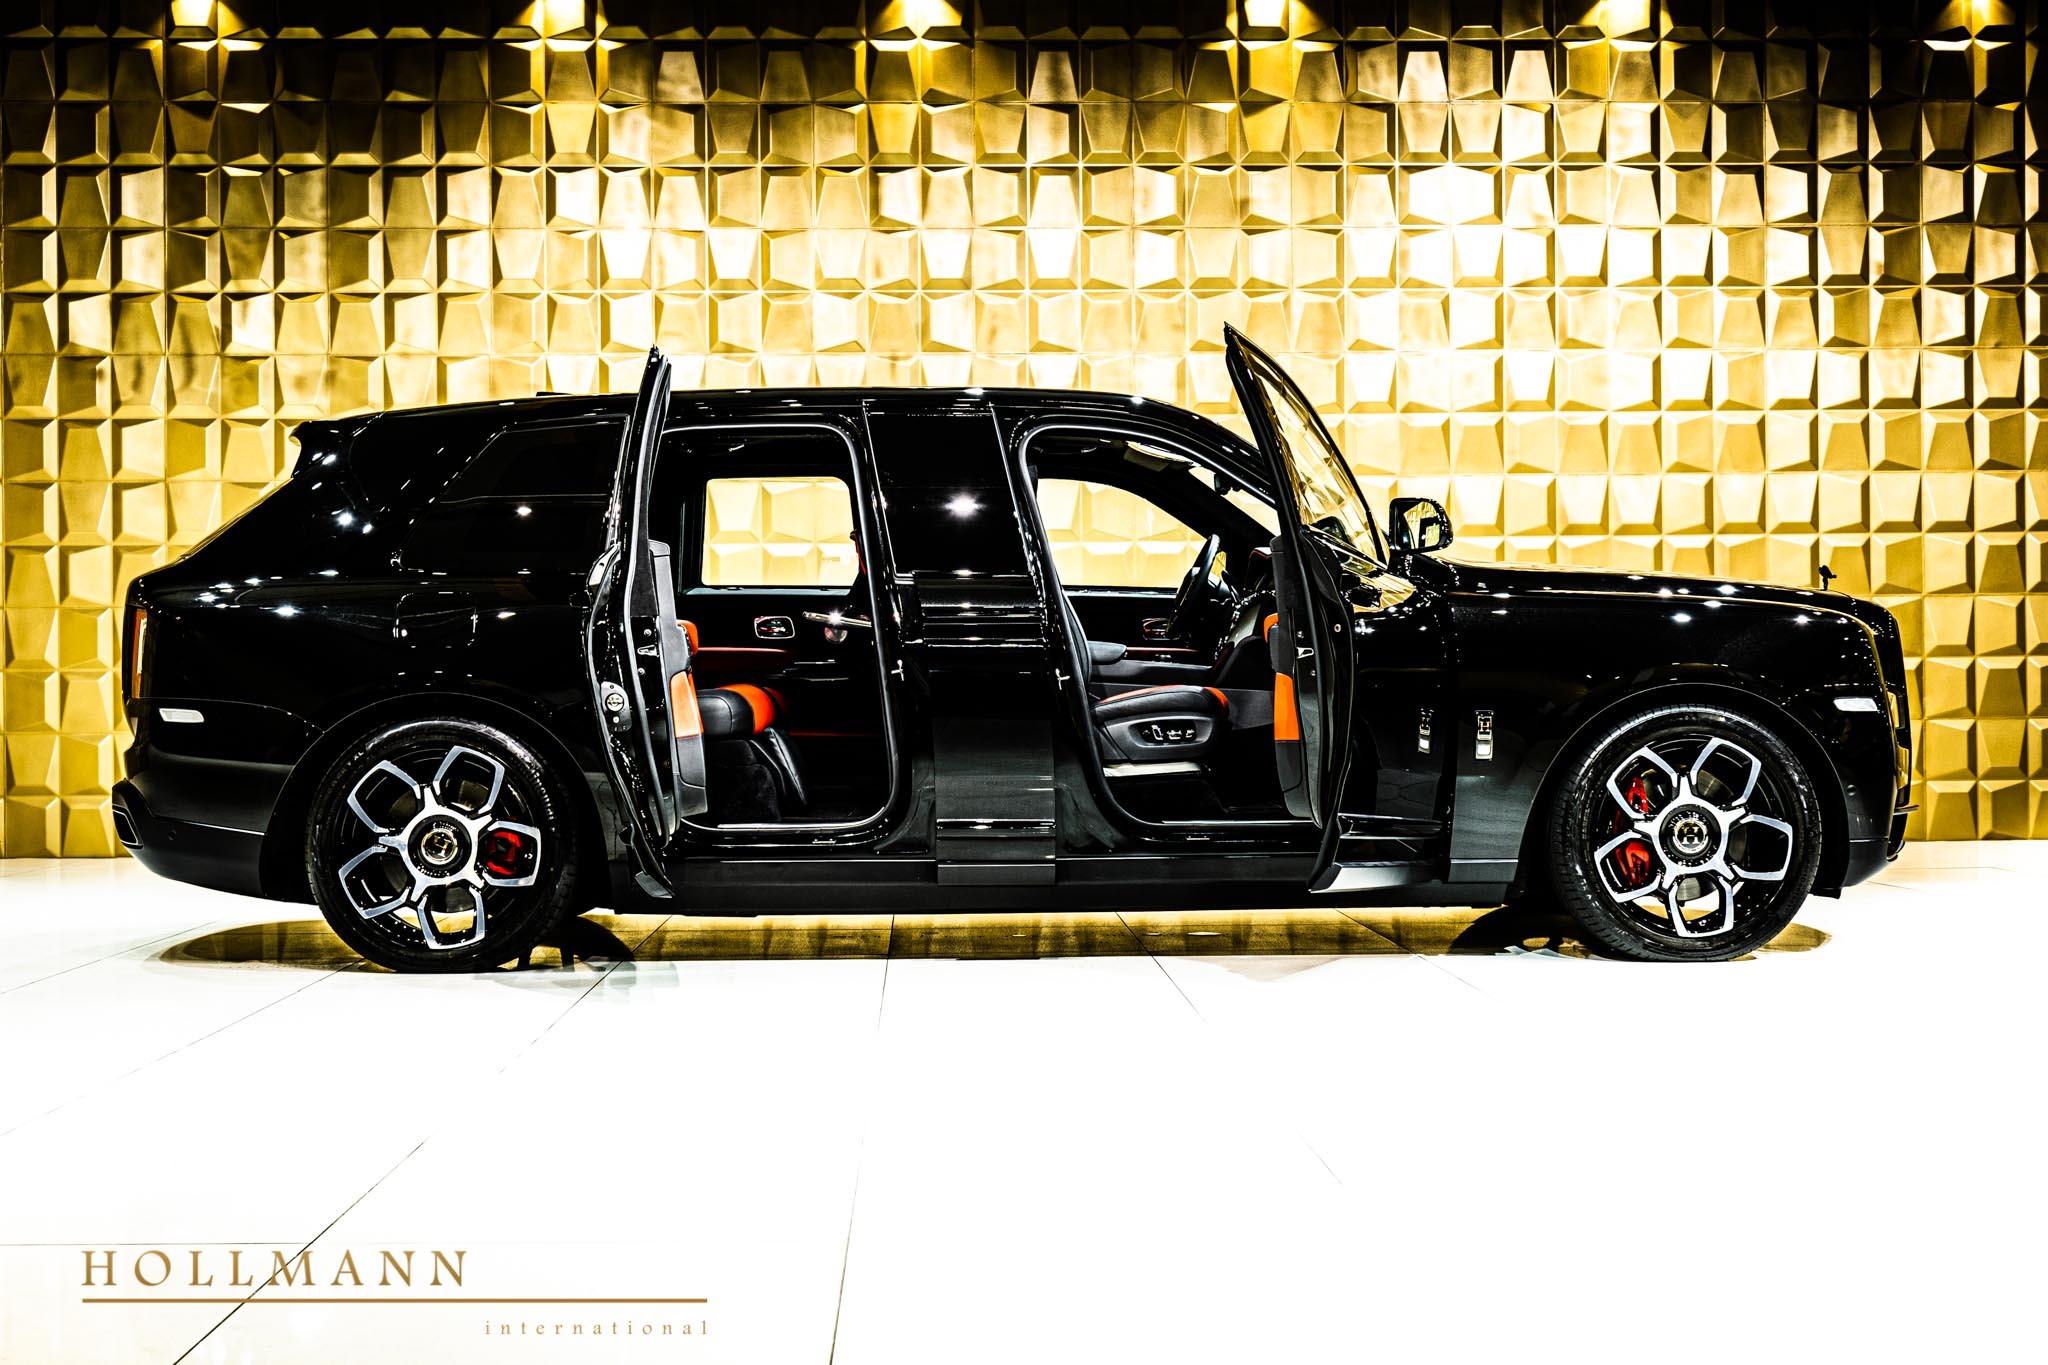 Armored Rolls-Royce Cullinan For Sale  INKAS Armored Vehicles, Bulletproof  Cars, Special Purpose Vehicles